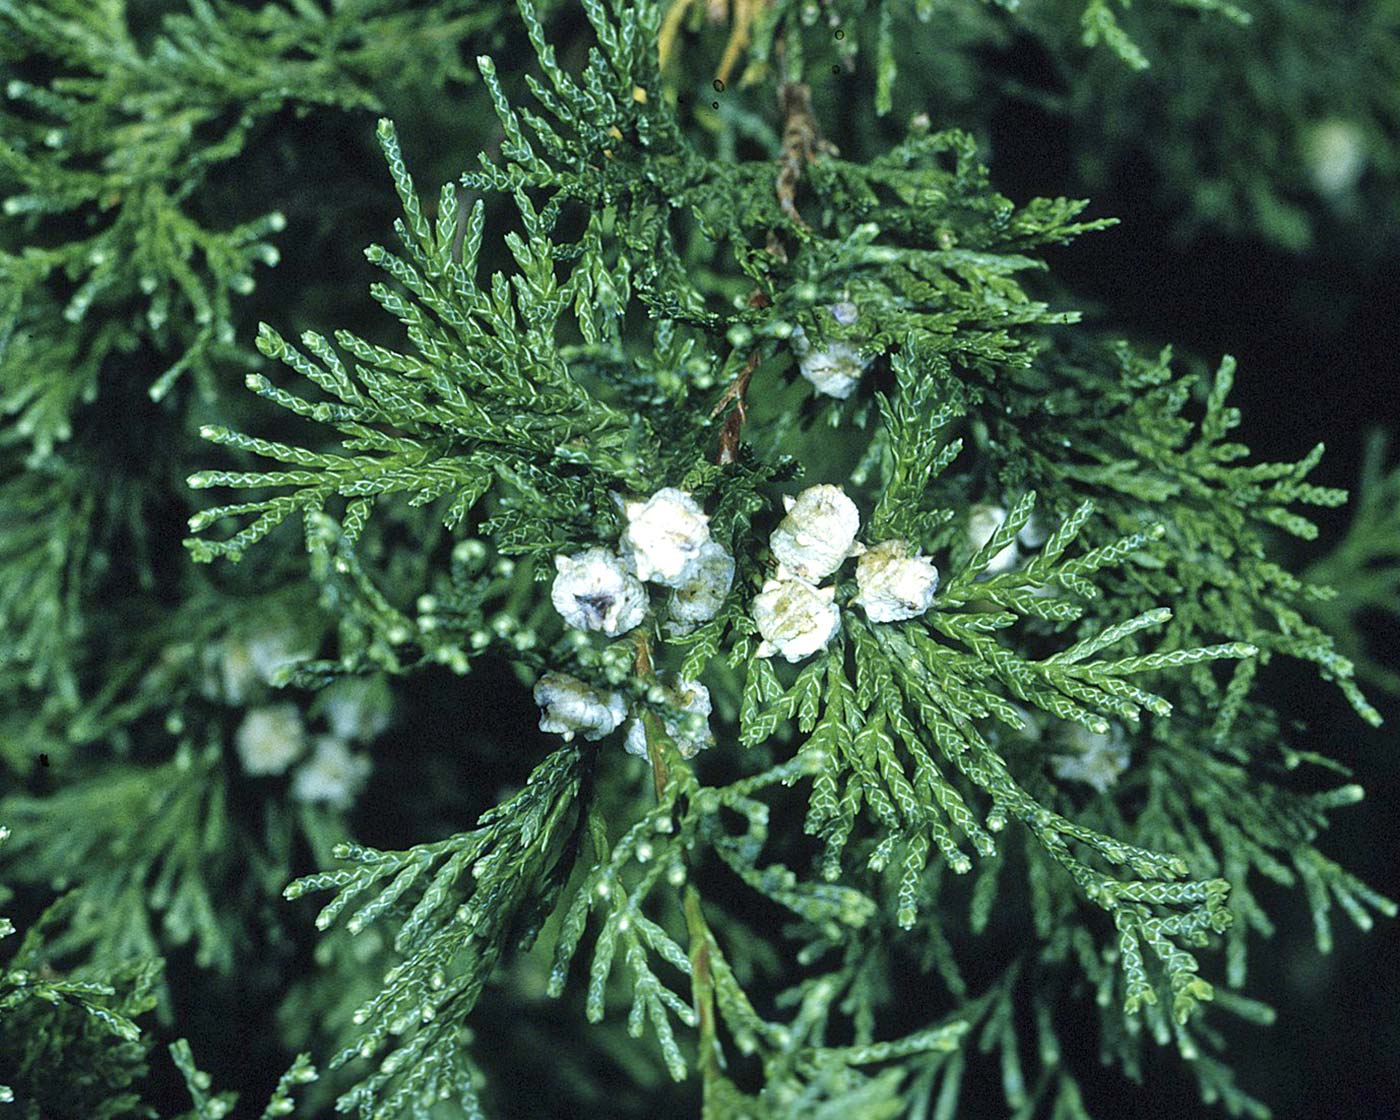 foliage of Chamaecyparis thyoides photo by Robert H. Mohlenbrock